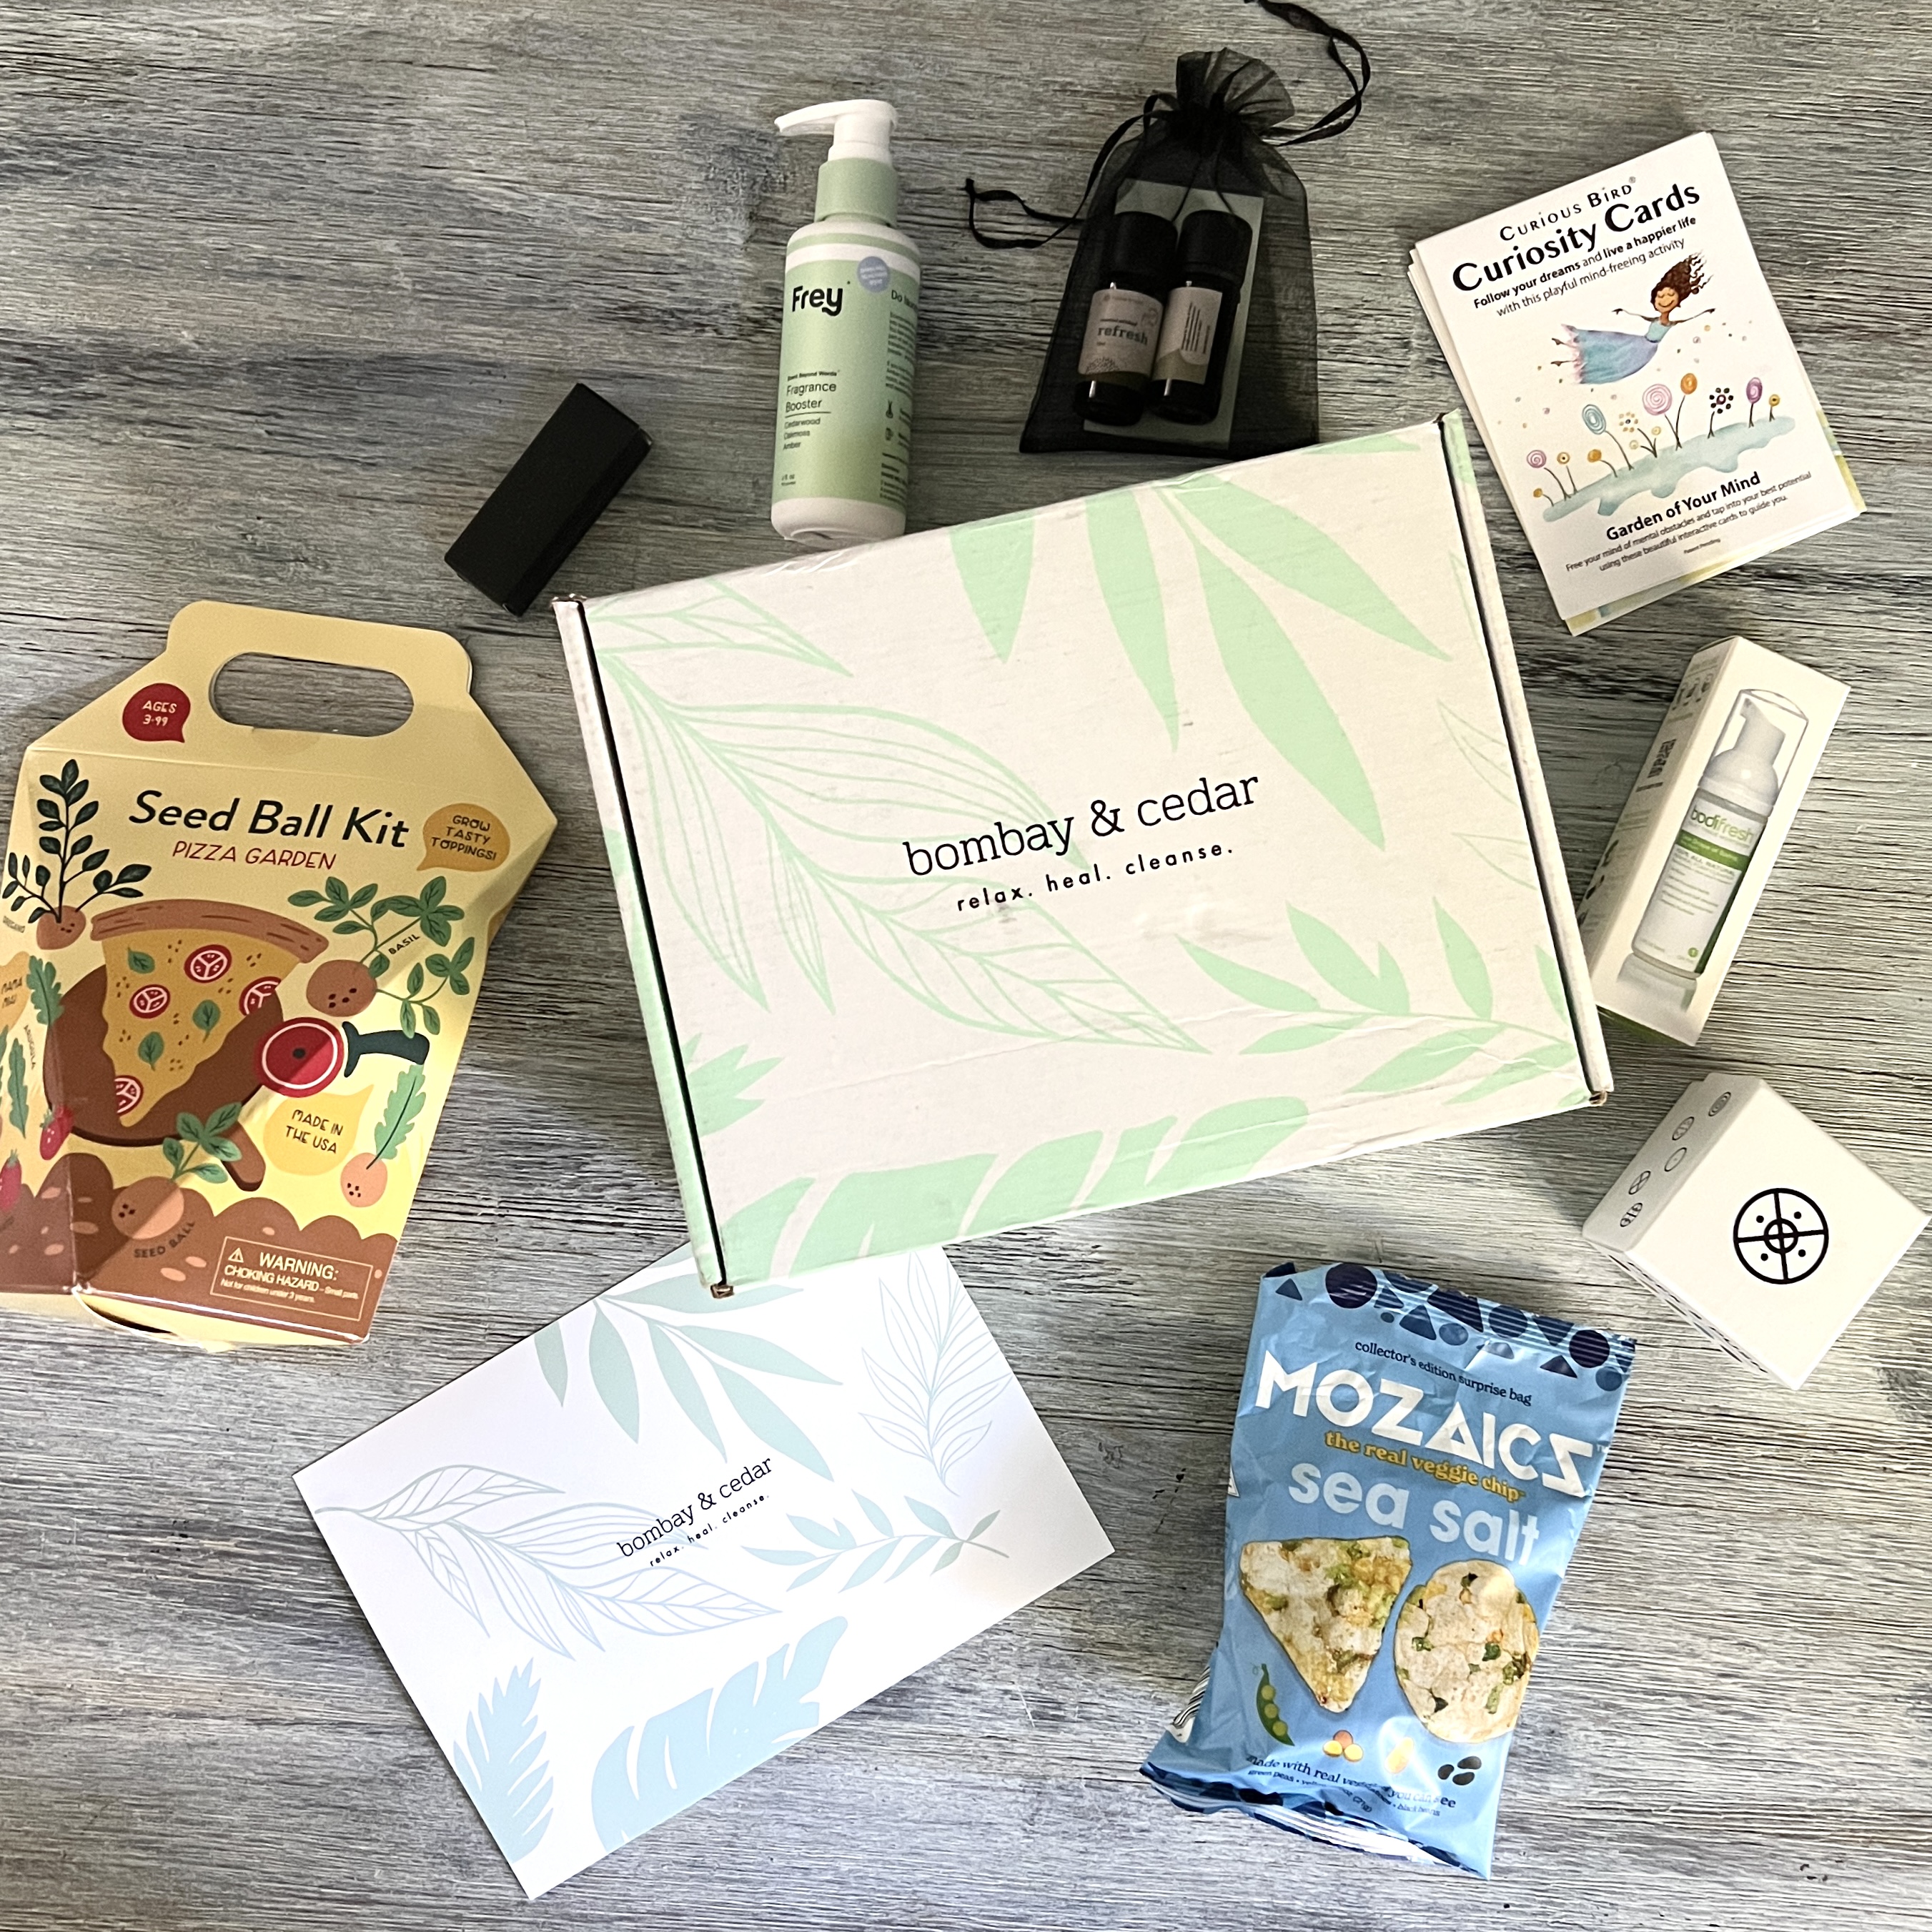 Bombay & Cedar Monthly Lifestyle Box “Social” Review + Coupon